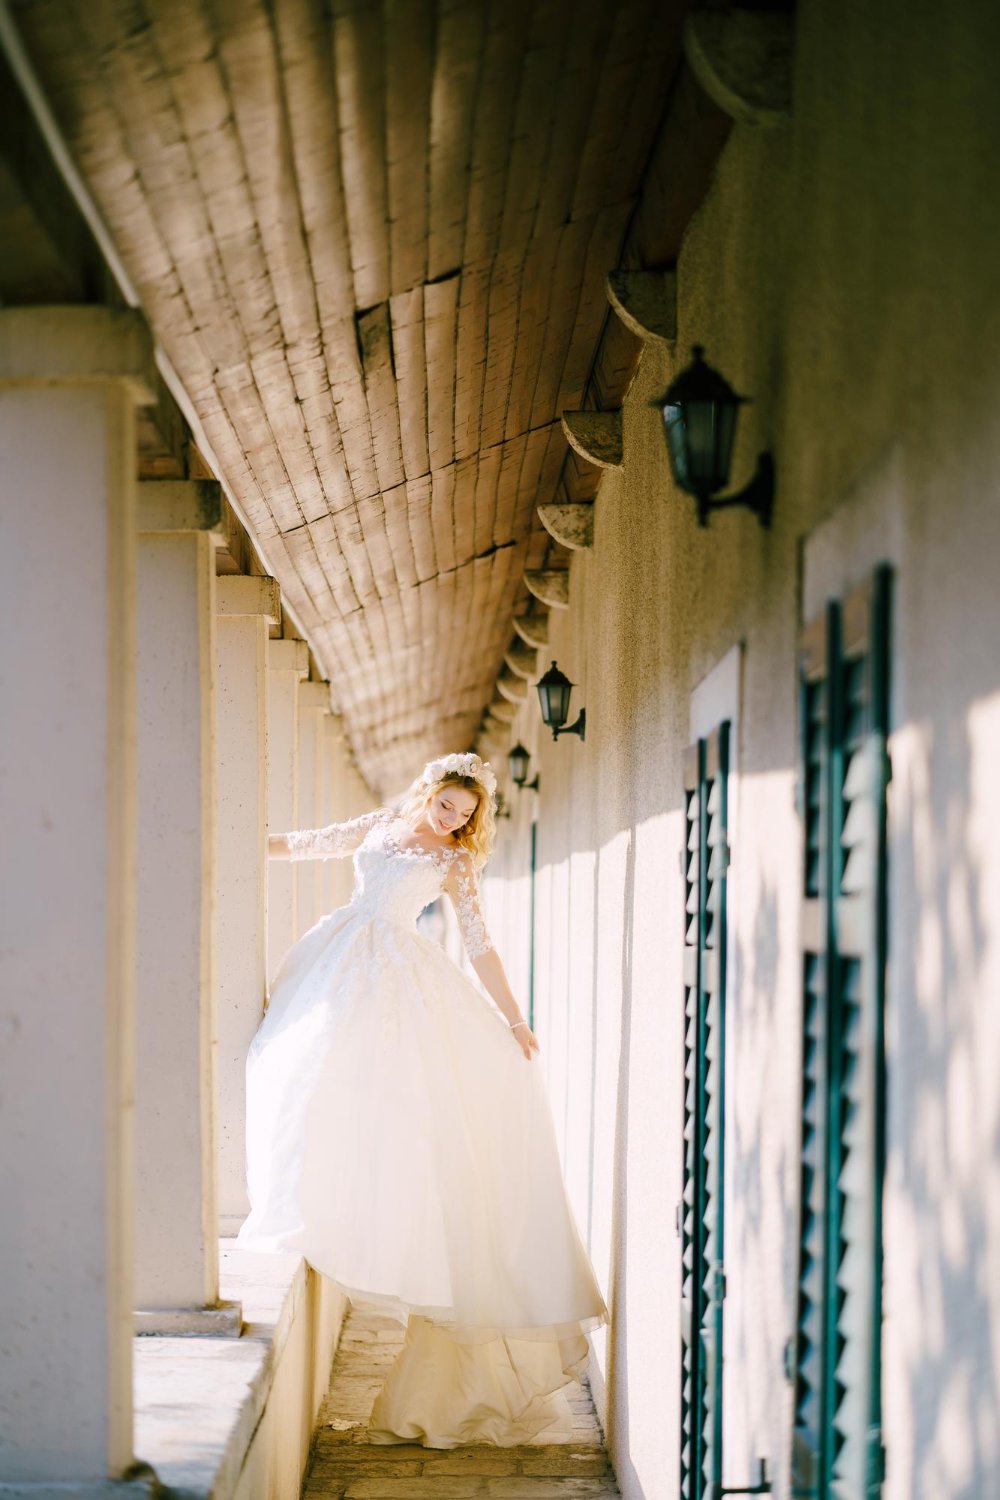 he bride stands on the balcony windowsill holding on to a column in an old house